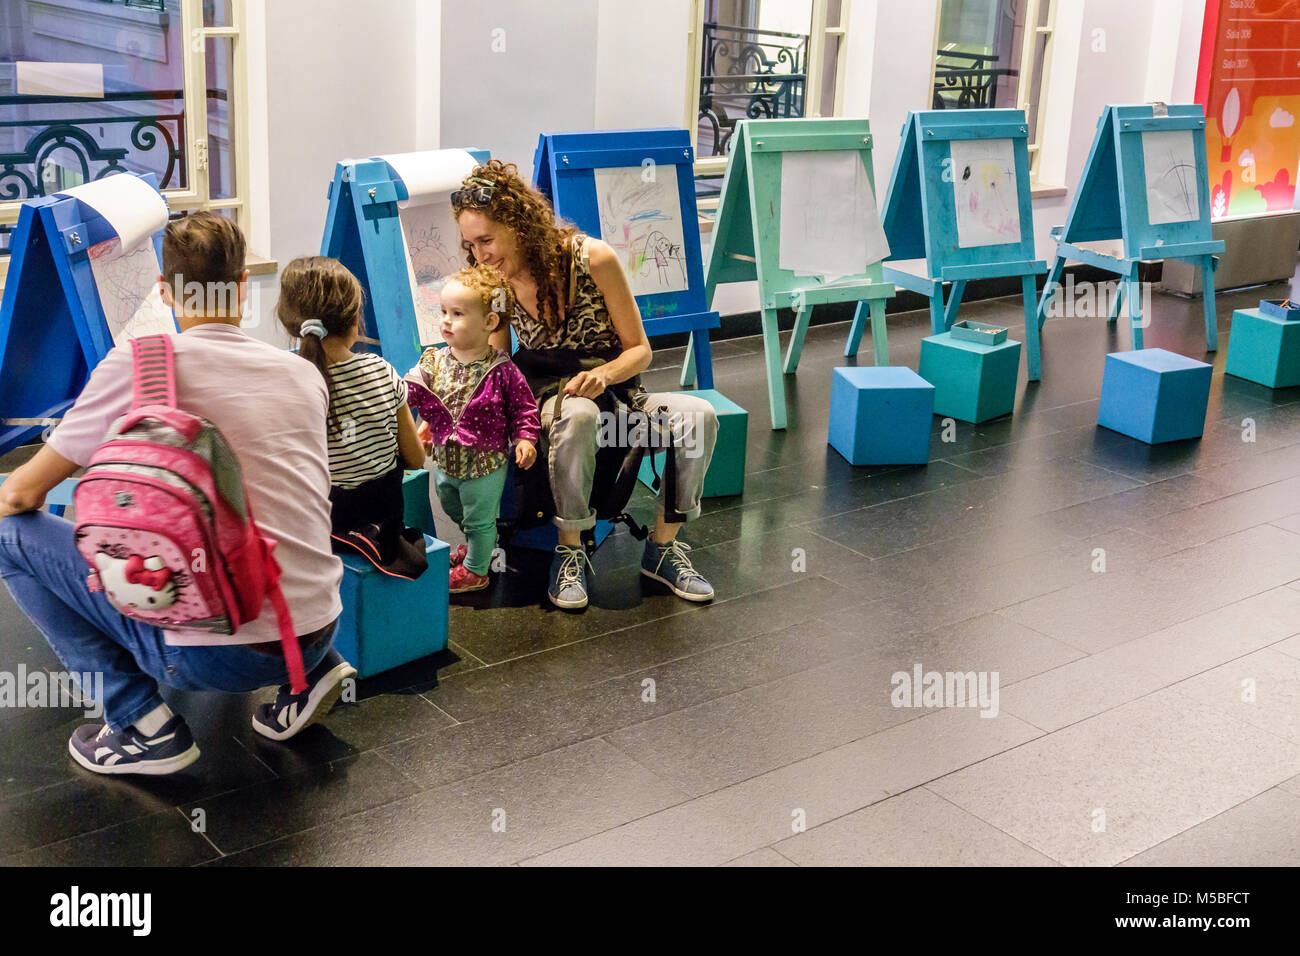 Buenos Aires Argentina,Centro Cultural Kirchner CCK,cultural centre,interior inside,children's activity floor,drawing,easels,Hispanic,woman female wom Stock Photo